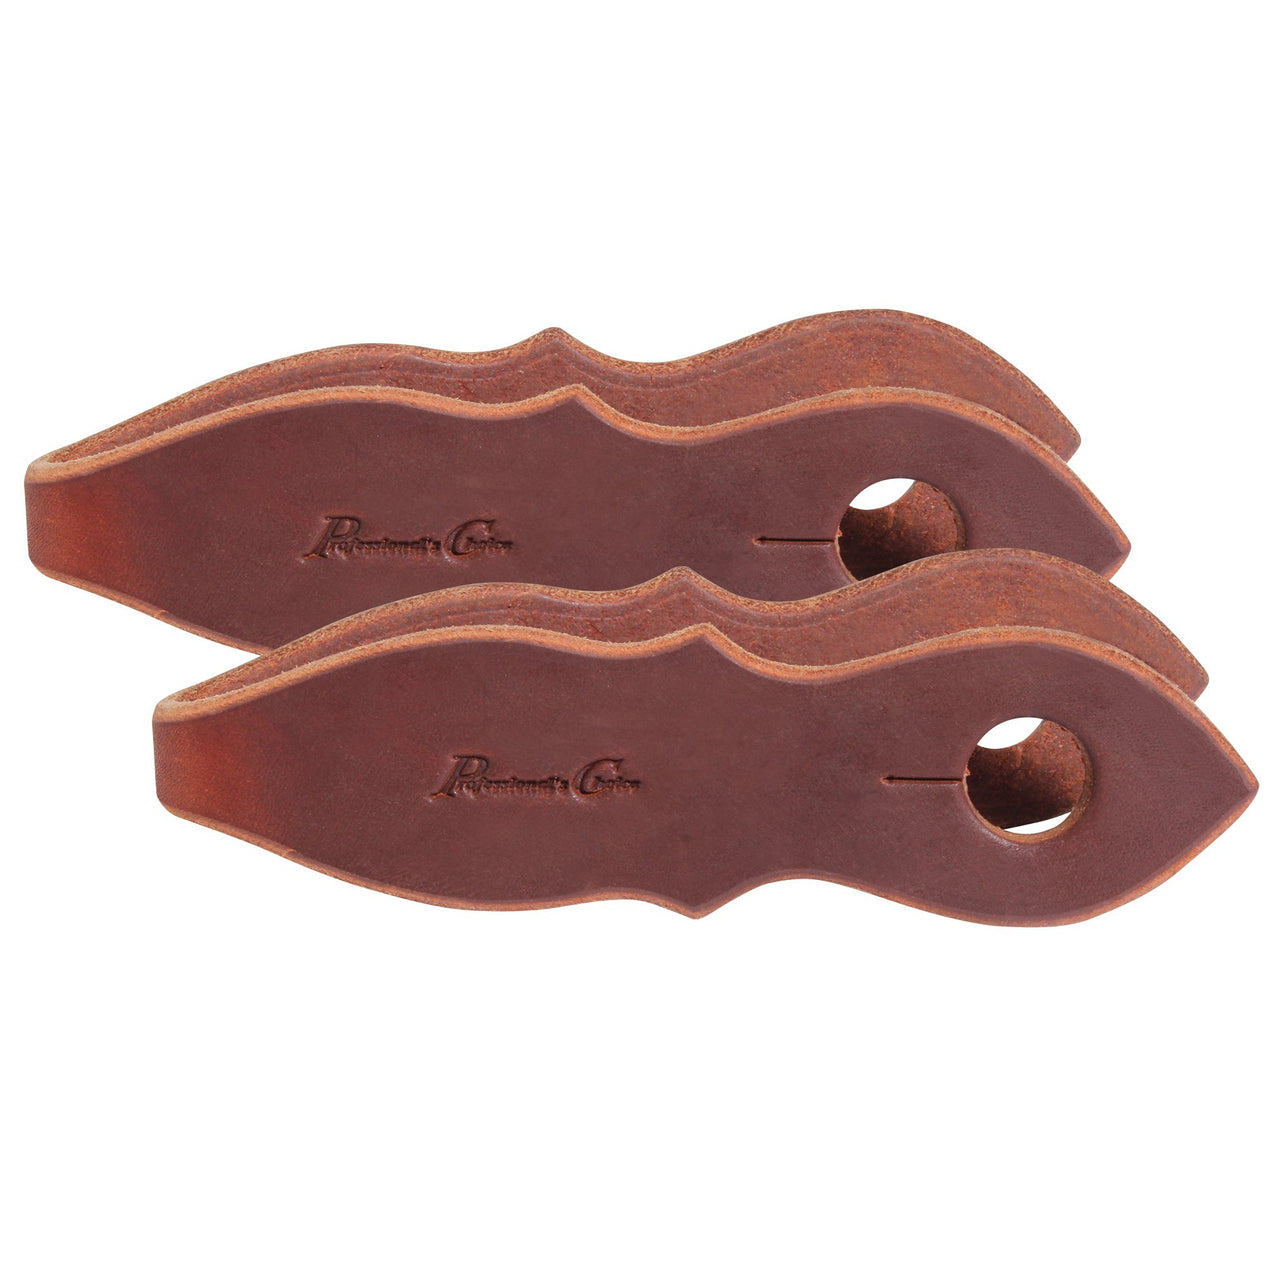 Professional's Choice Slobber Straps - Oiled Harness Leather